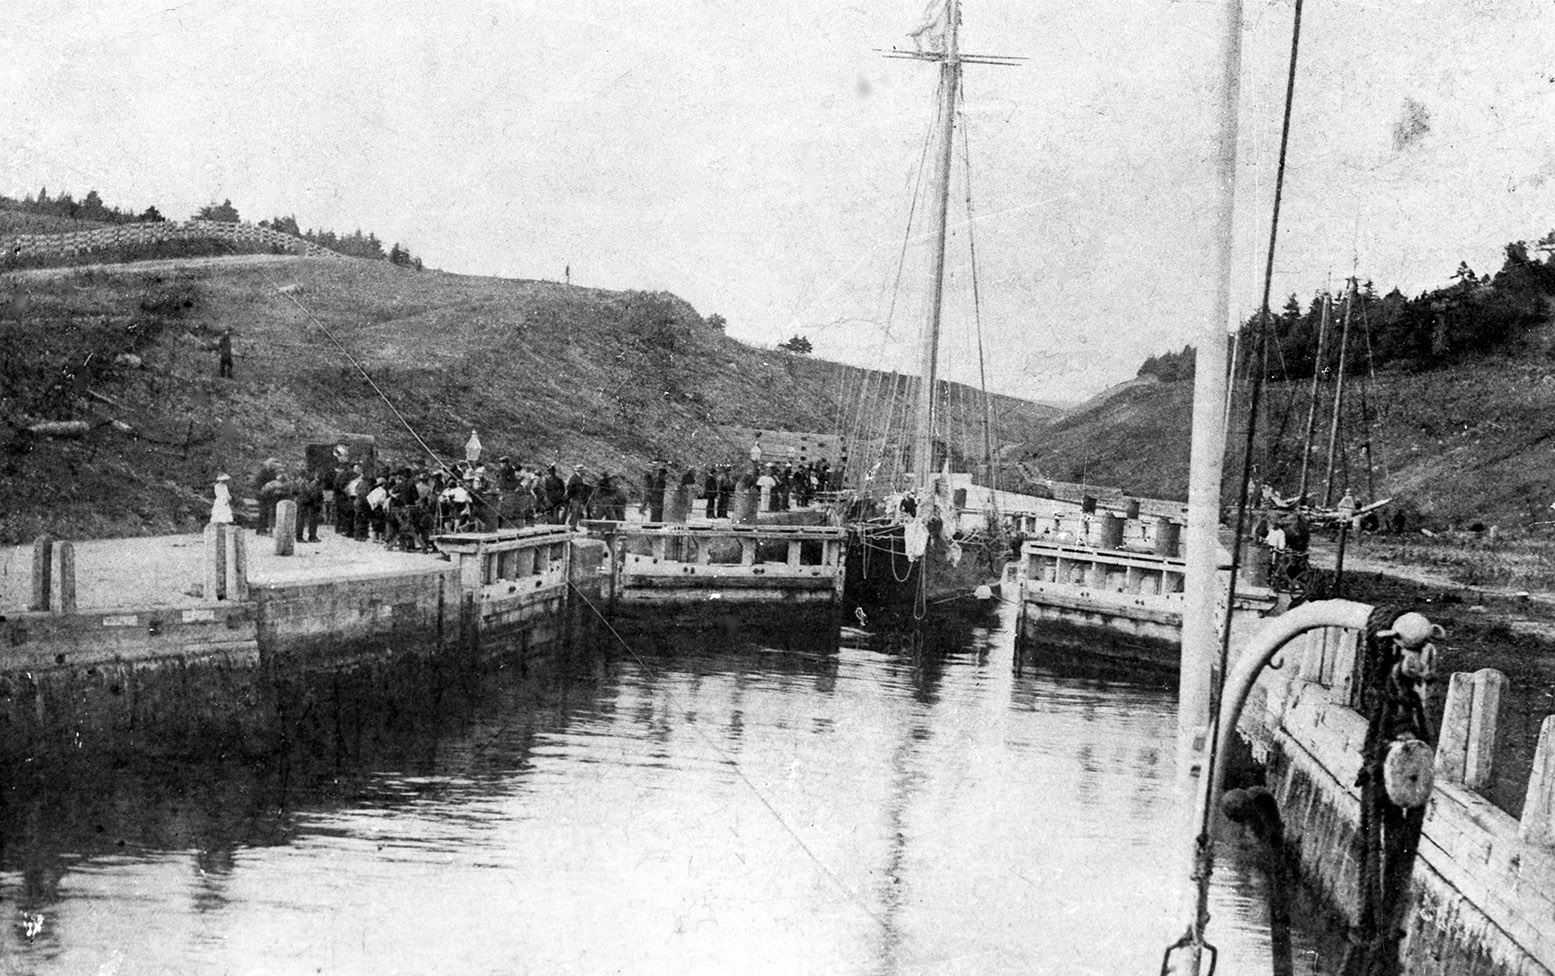 communityalbums - Sailing ship and crowd at St. Peter's Canal